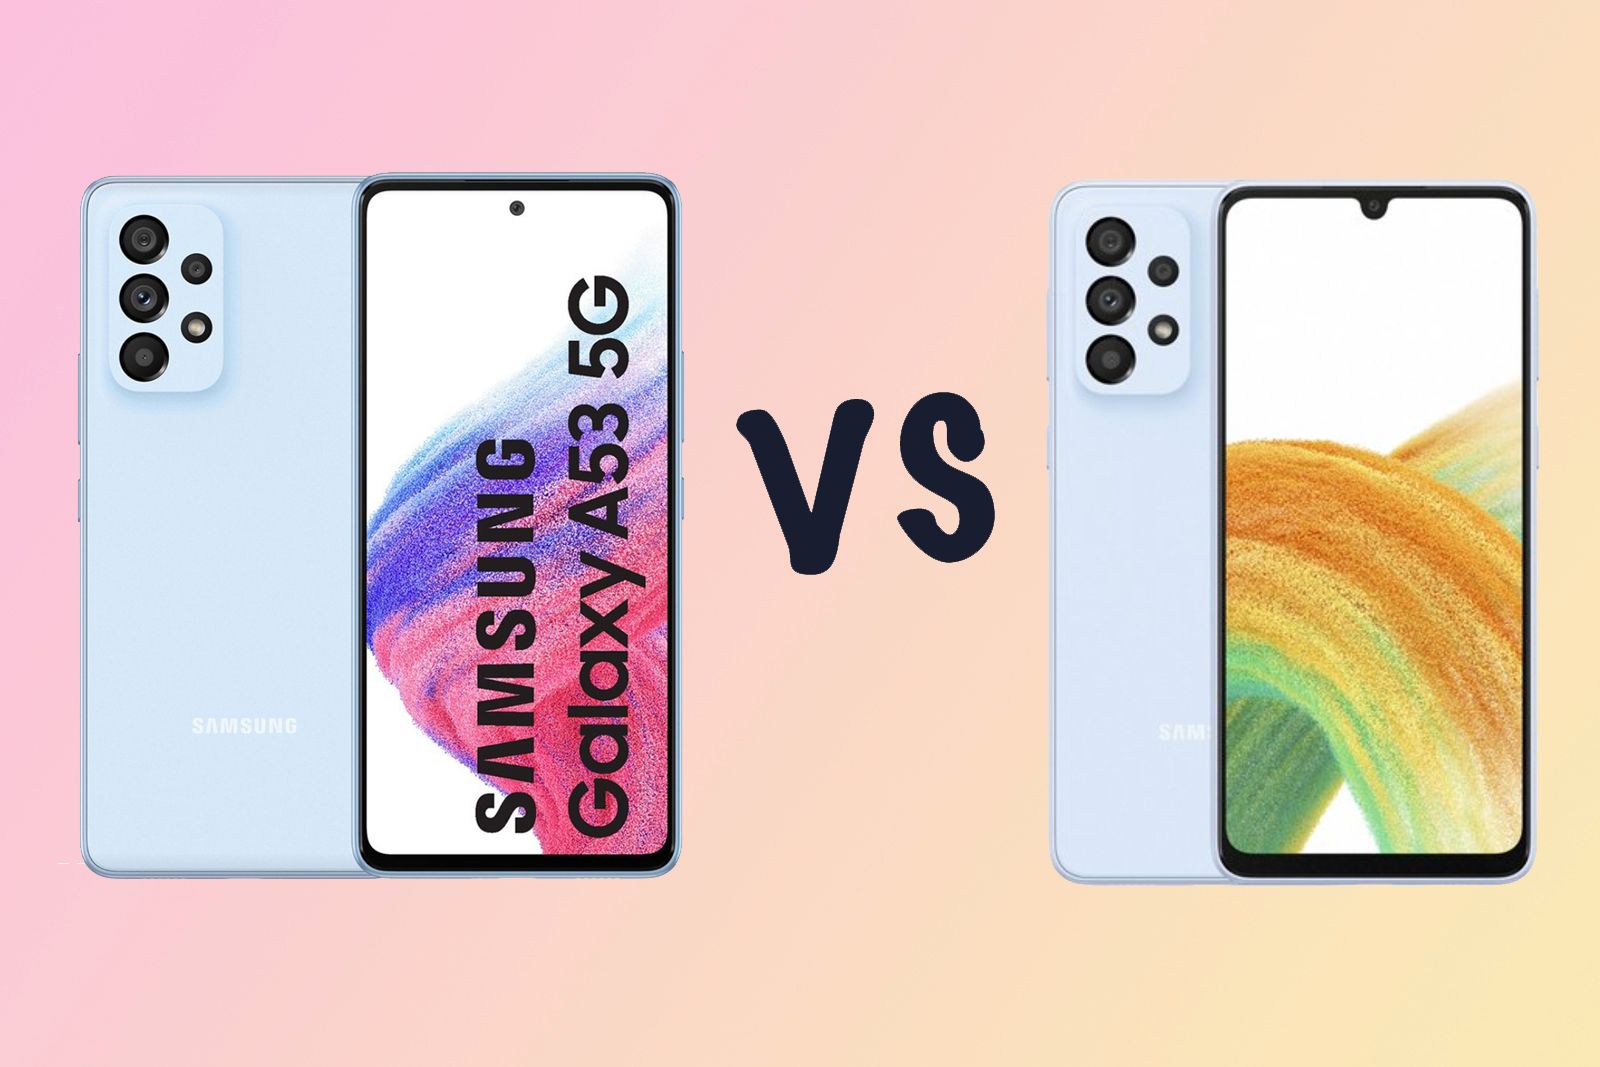 Samsung Galaxy A53 5G vs Galaxy A33 5G: all the differences - PhoneArena